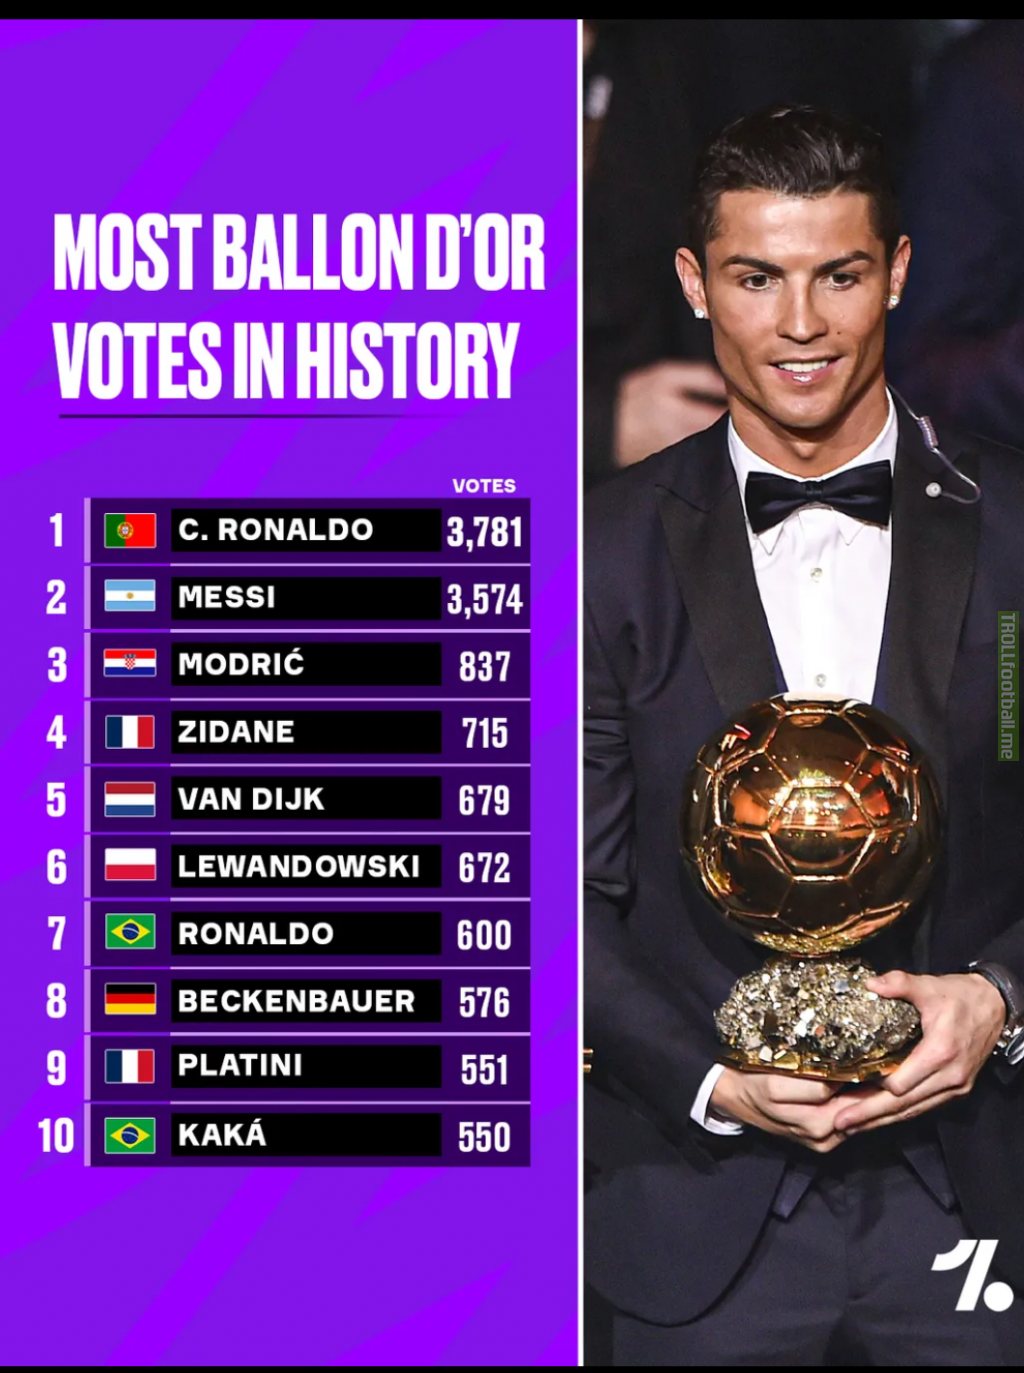 Most Ballon d'or votes in history